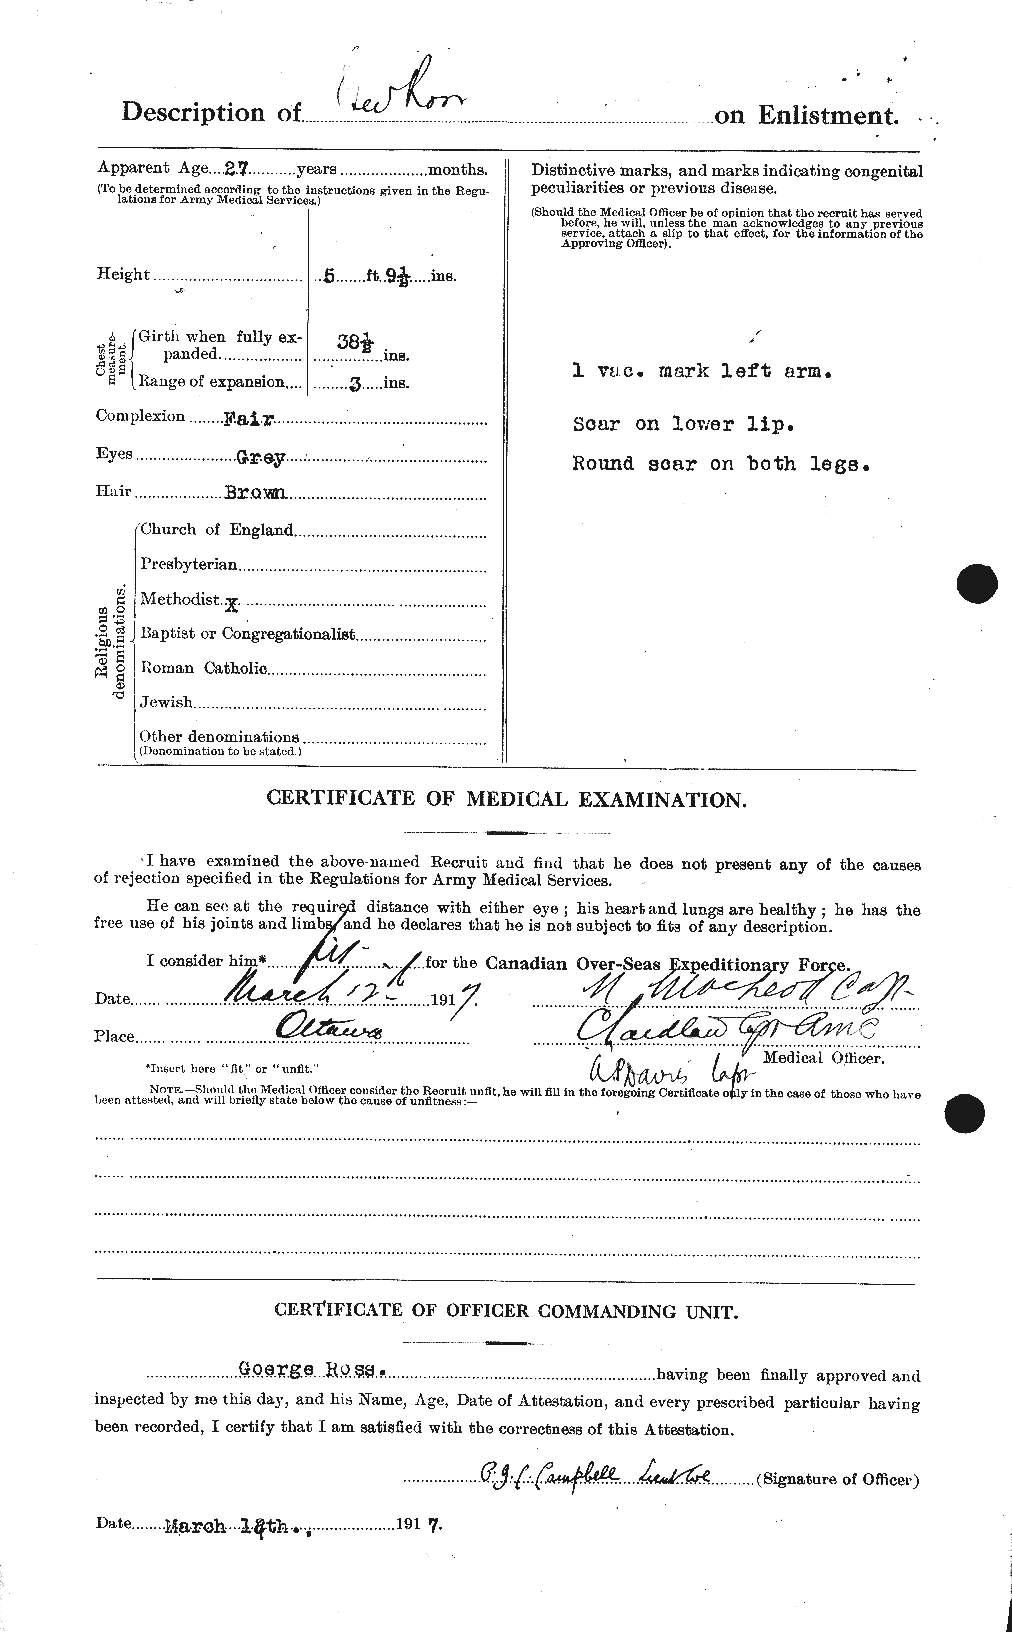 Personnel Records of the First World War - CEF 613059b